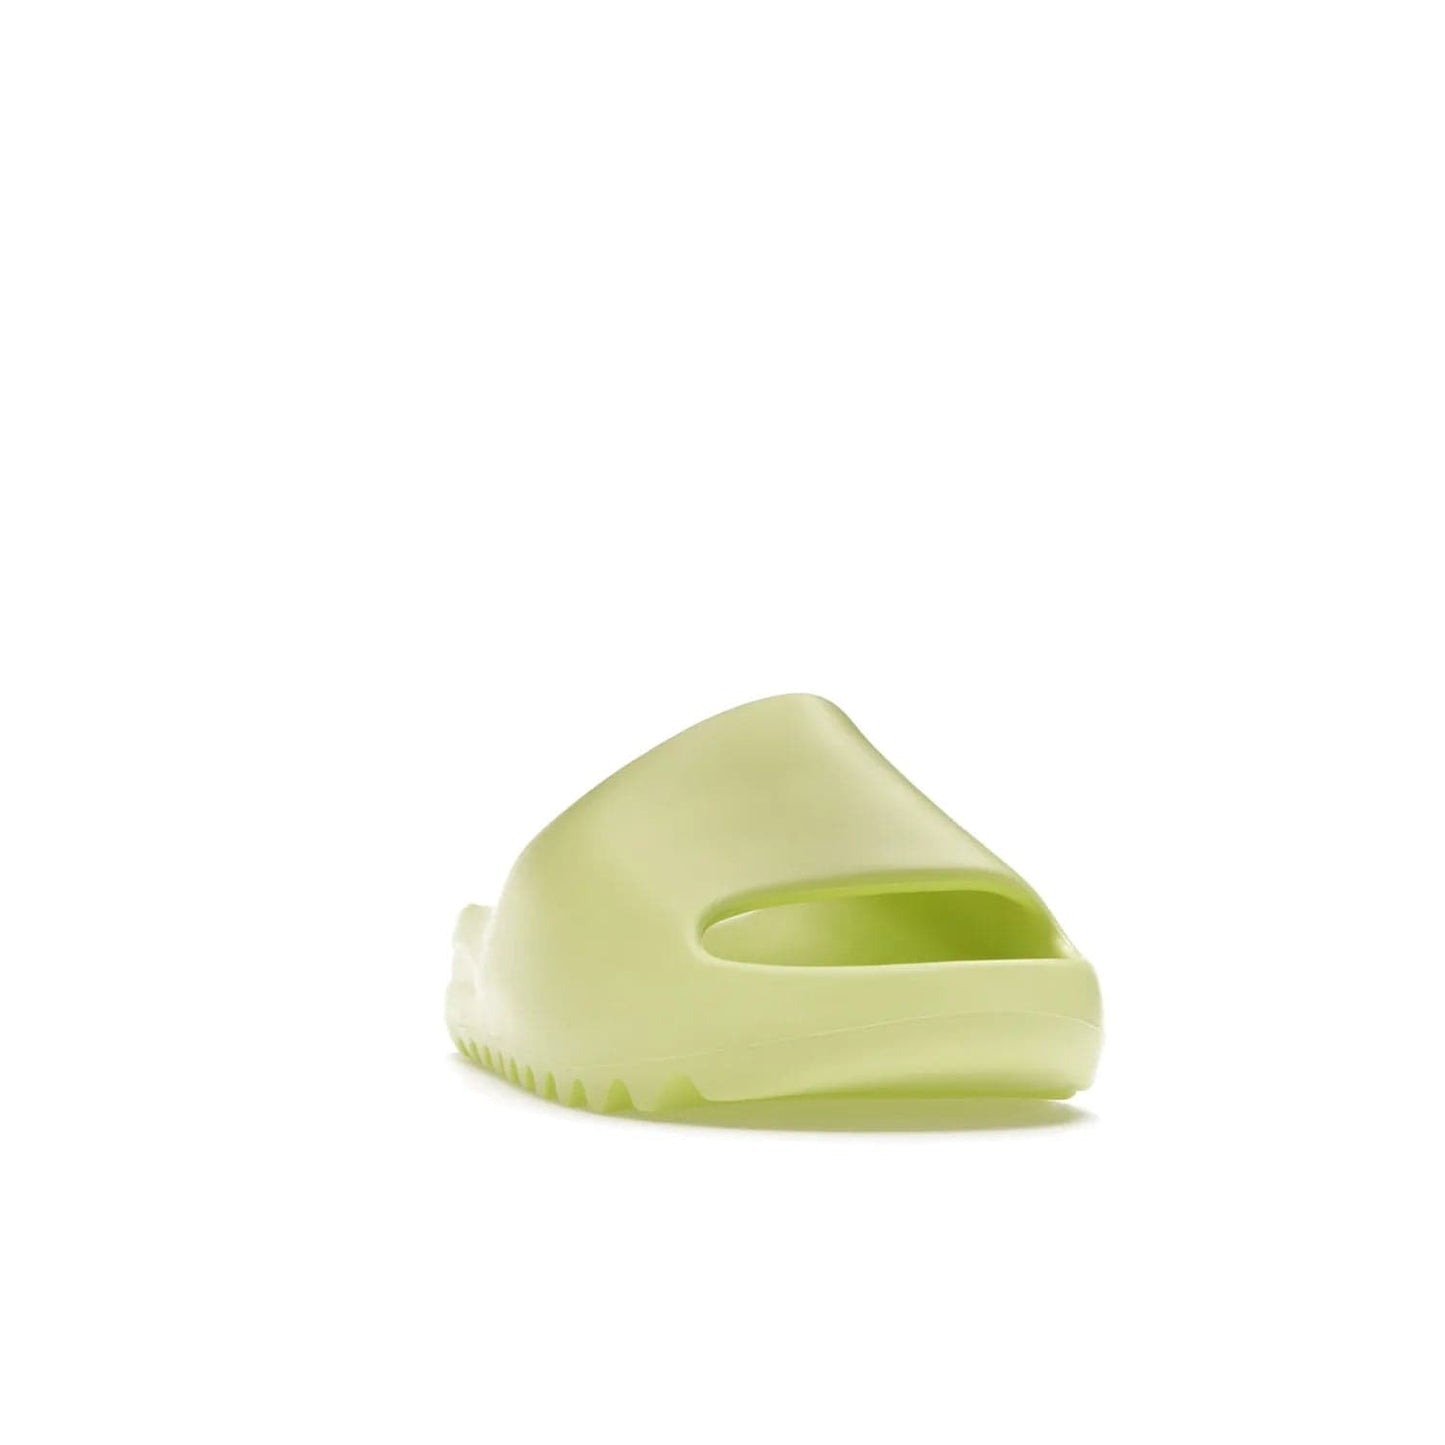 adidas Yeezy Slide Glow Green - Image 8 - Only at www.BallersClubKickz.com - Experience an unexpected summer style with the adidas Yeezy Slide Glow Green. This limited edition slide sandal provides a lightweight and durable construction and a bold Glow Green hue. Strategic grooves enhance traction and provide all-day comfort. Make a statement with the adidas Yeezy Slide Glow Green.